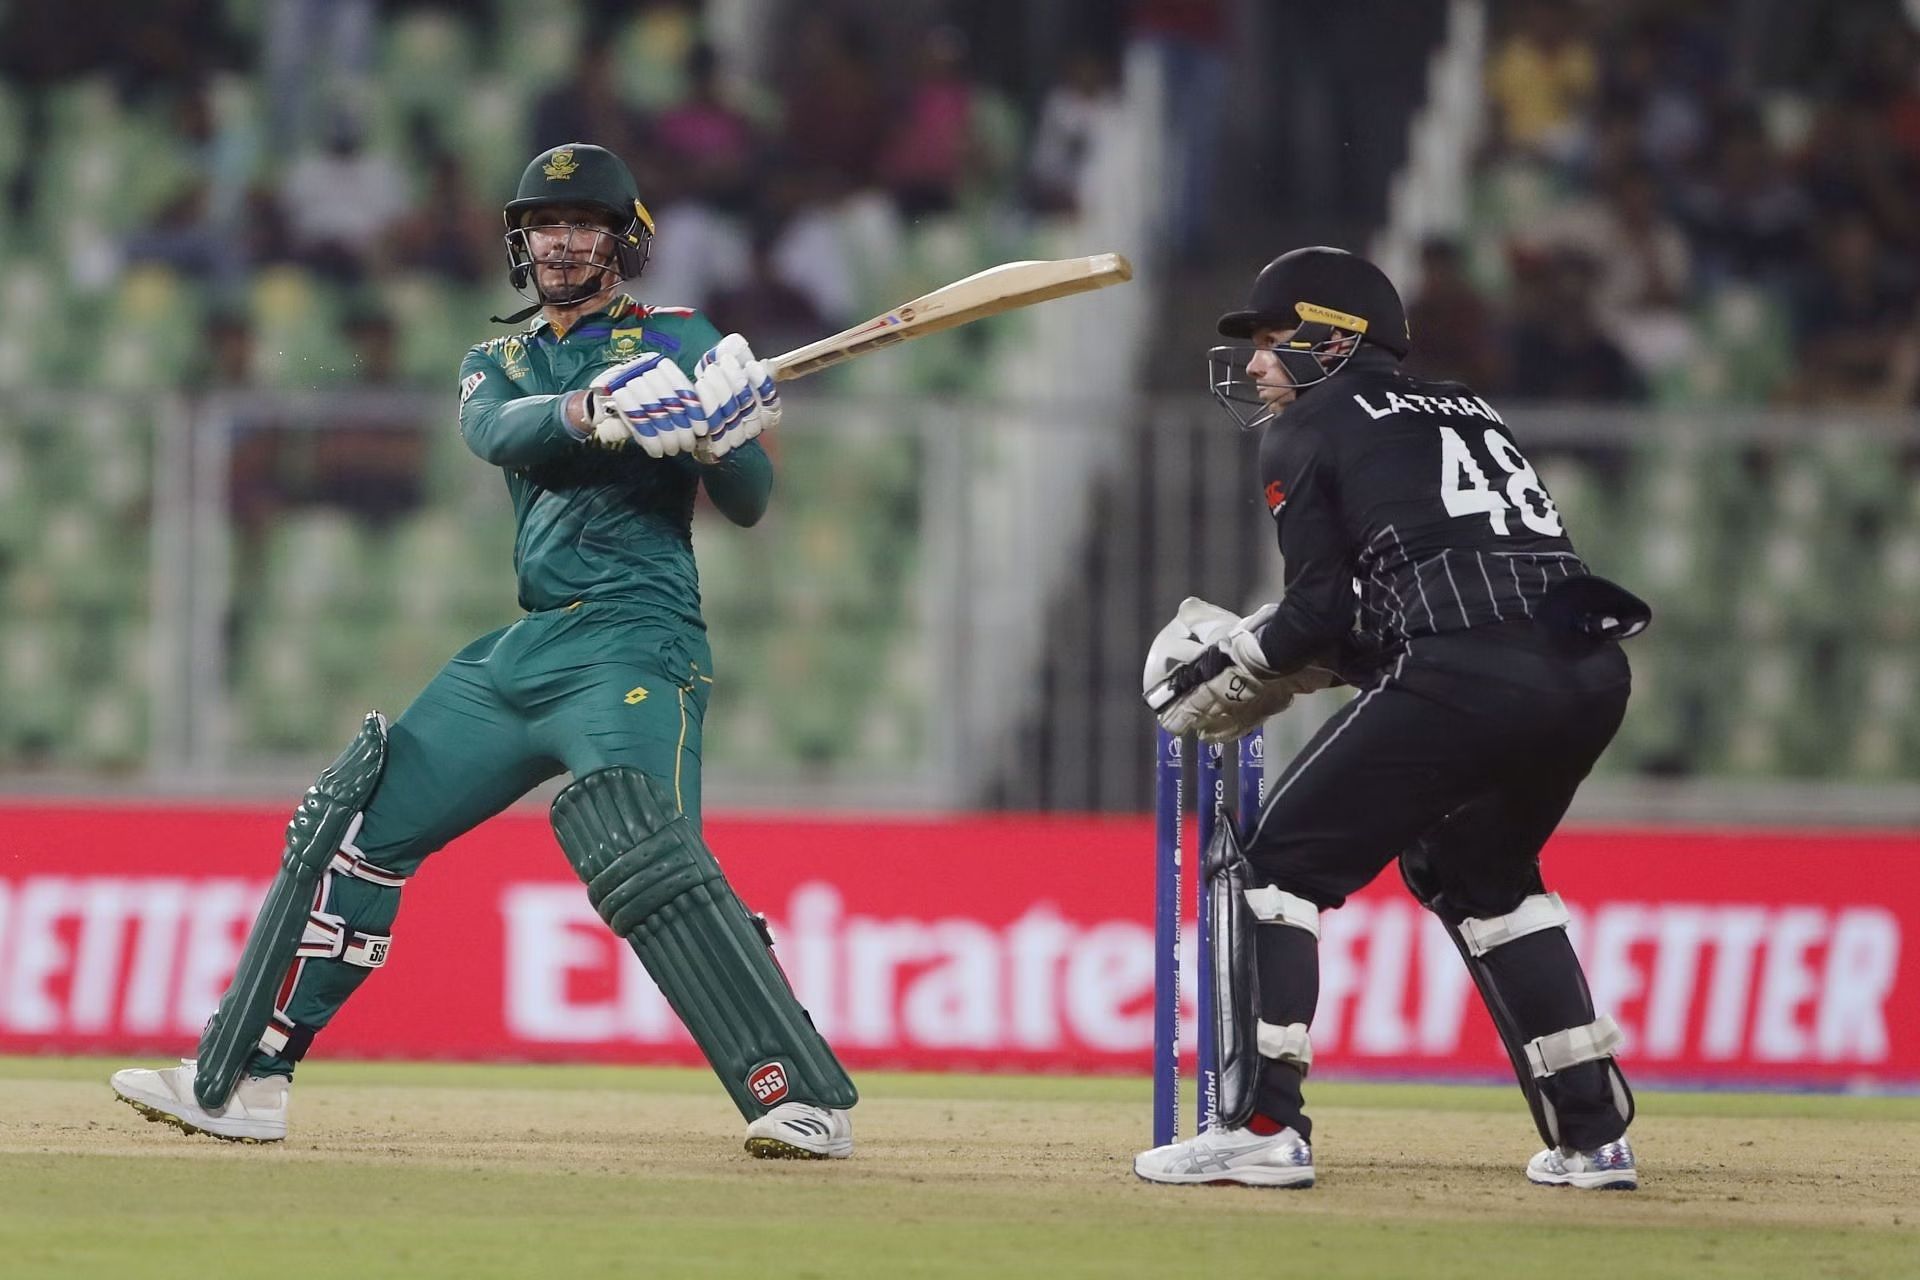 South Africa and New Zealand are favored to reach the semi-finals of the ongoing World Cup. [P/C: Getty]